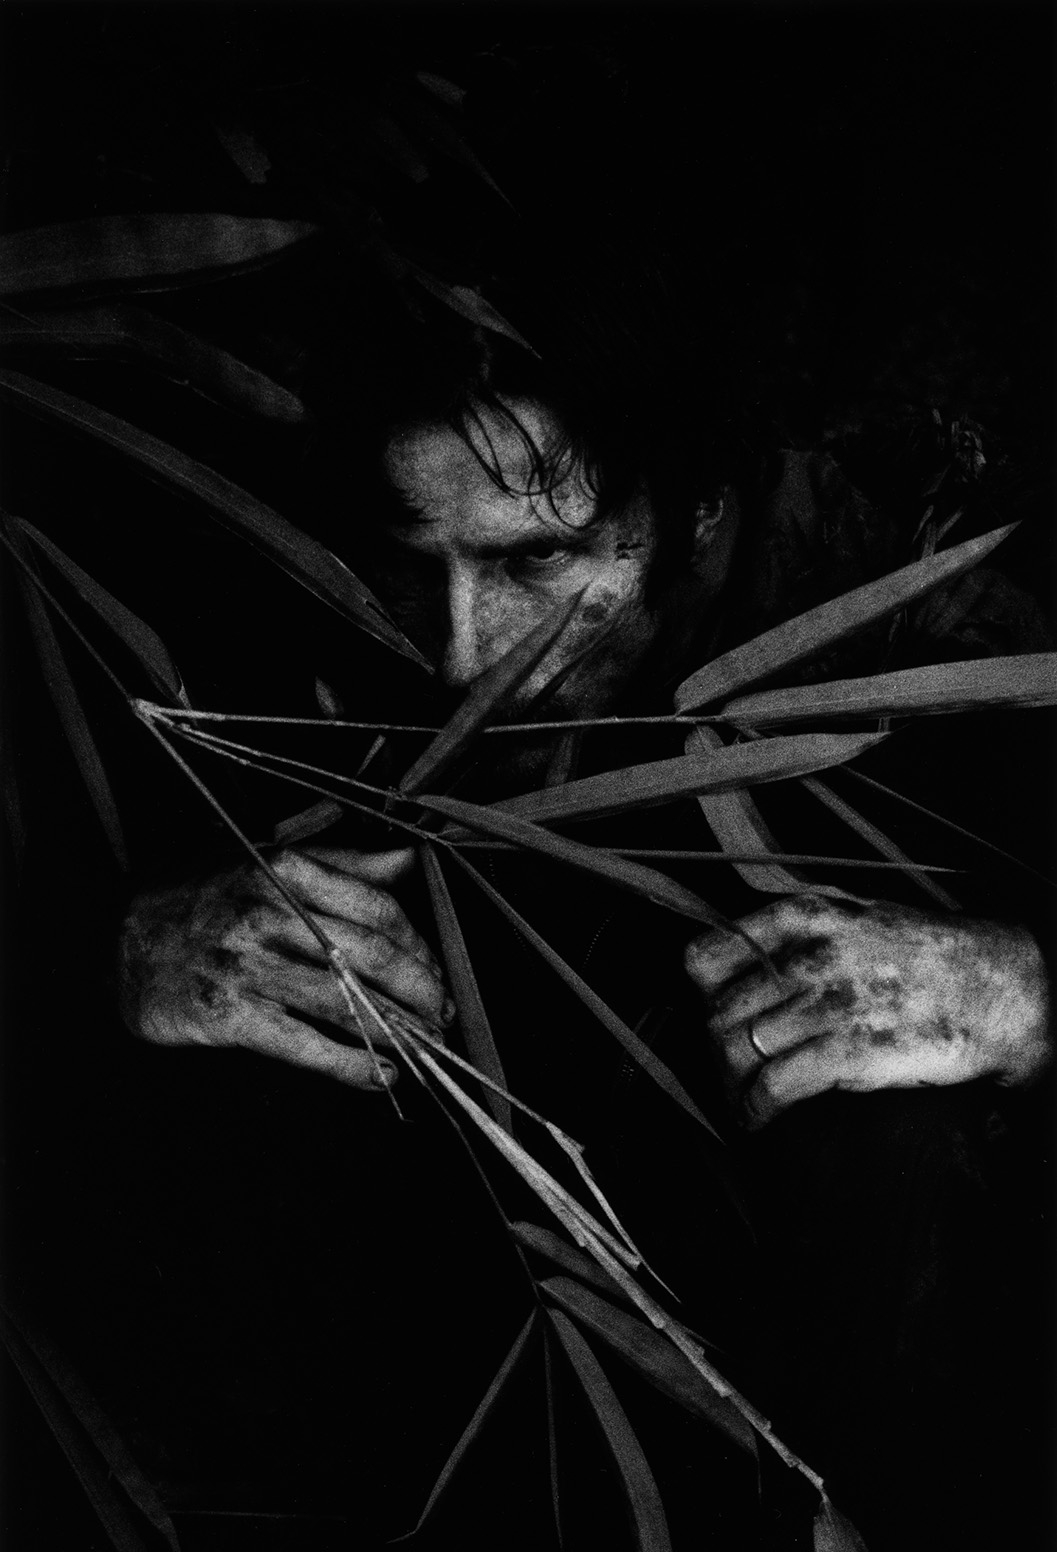 Black and white photo: A man looks grimly through the leaves of a jungle plant.